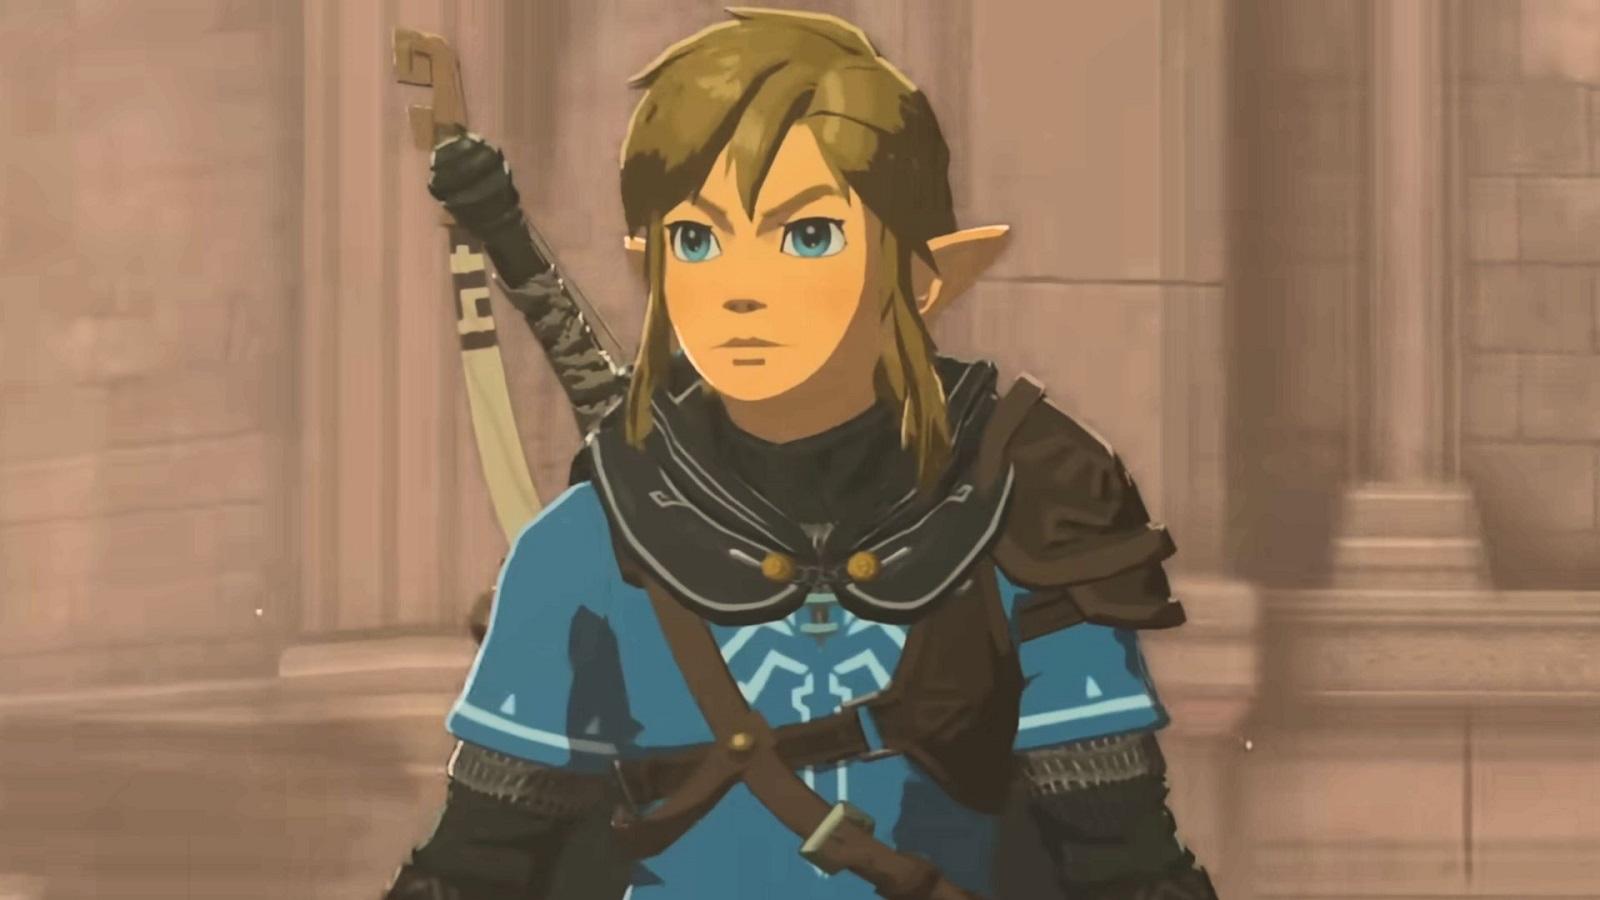 Link looking at the screen